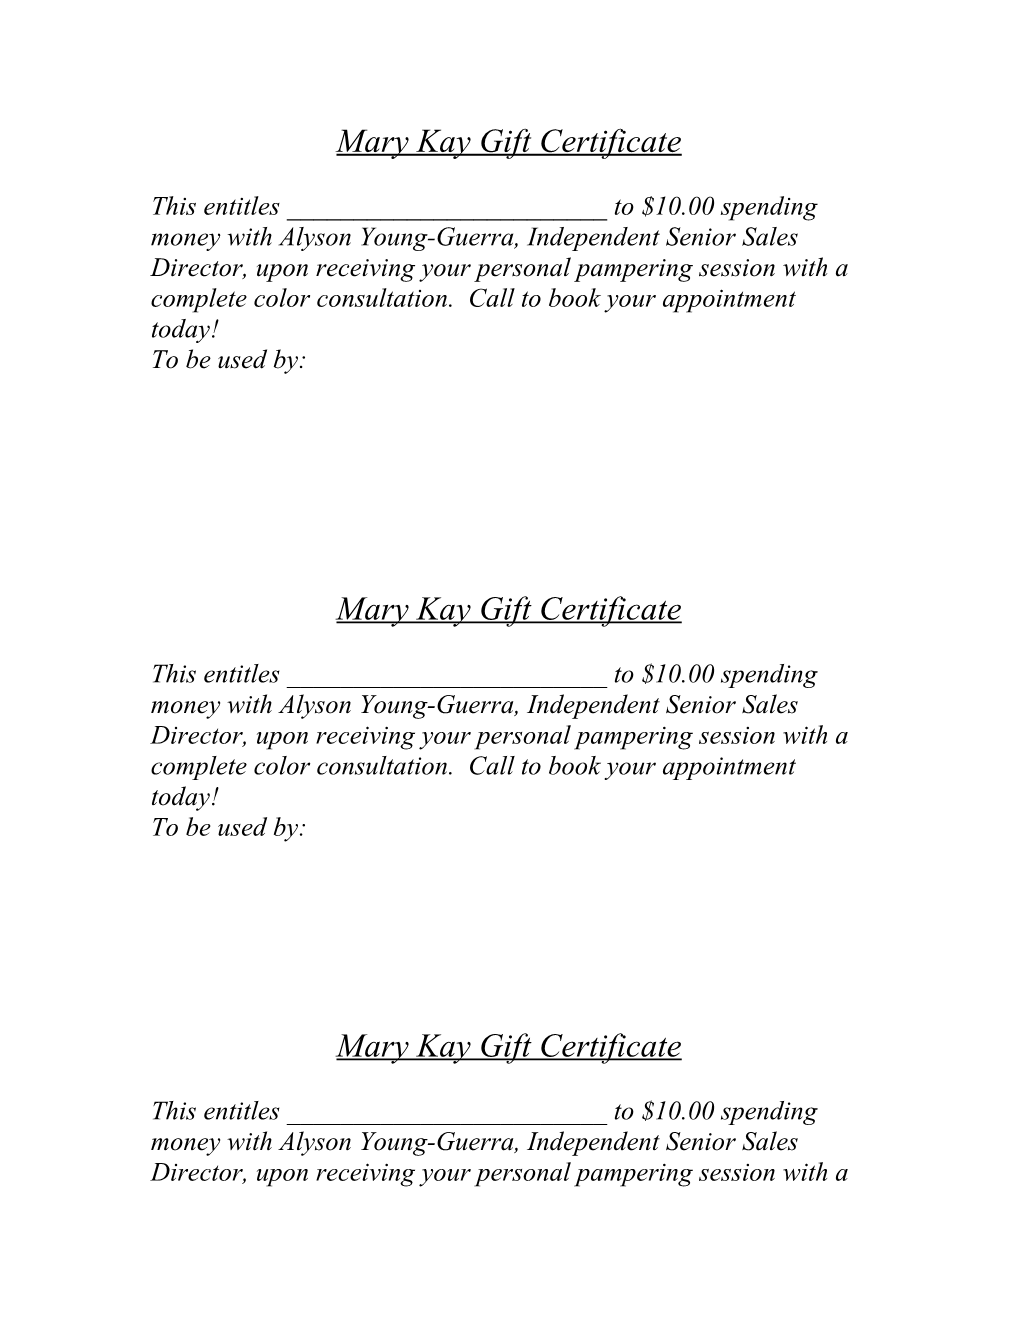 Mary Kay Gift Certificate